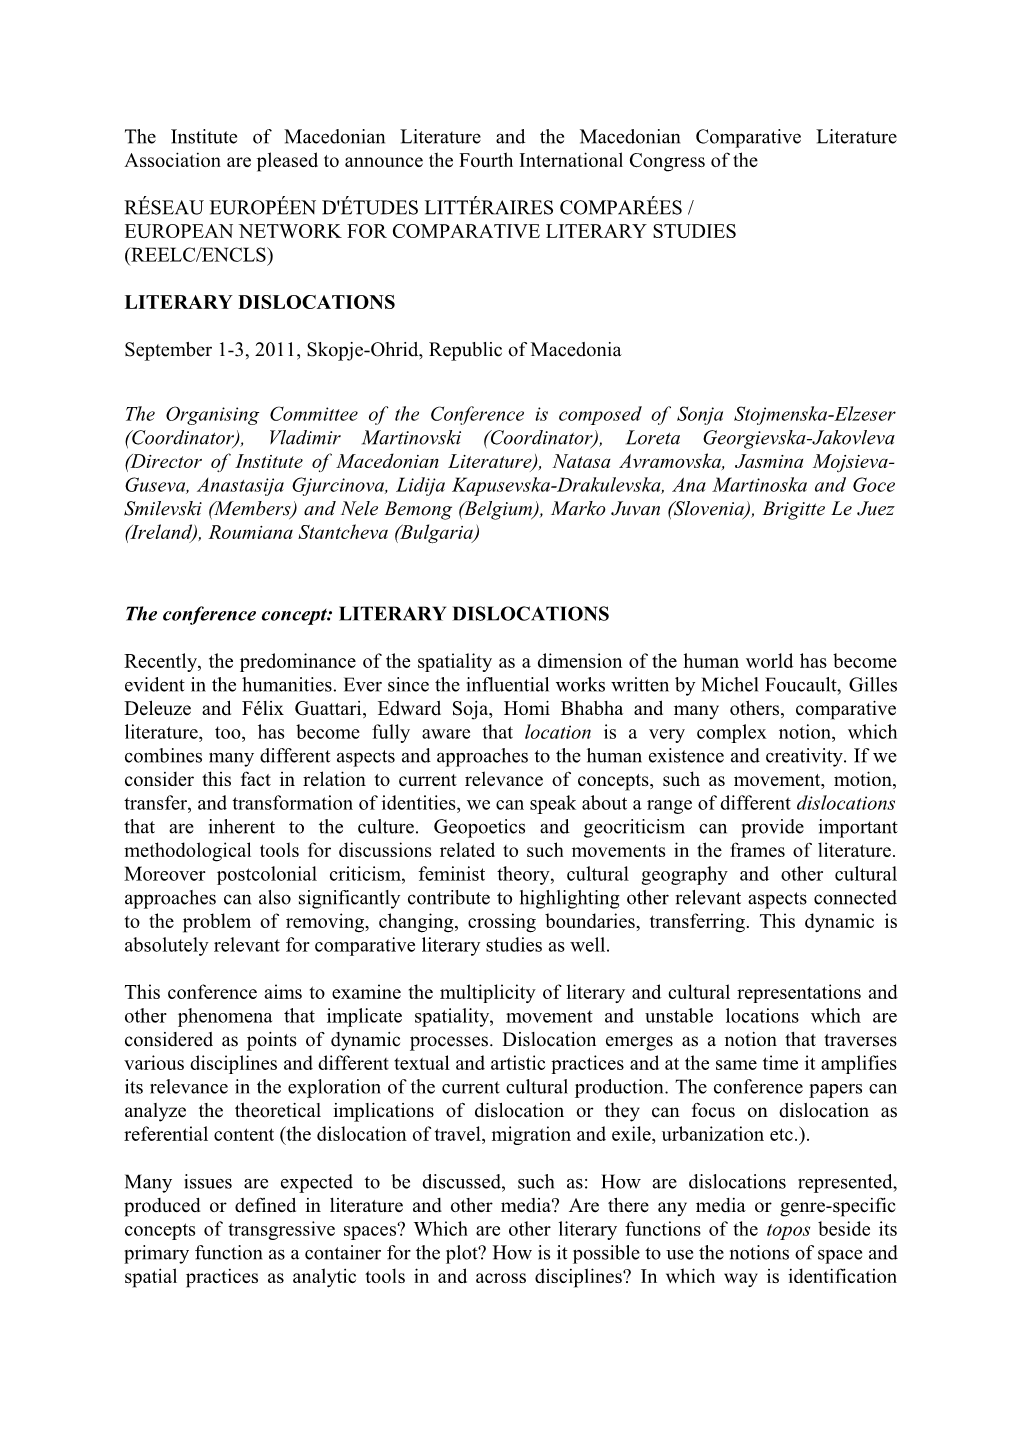 The Institute of Macedonian Literature and the Macedonian Comparative Literature Association